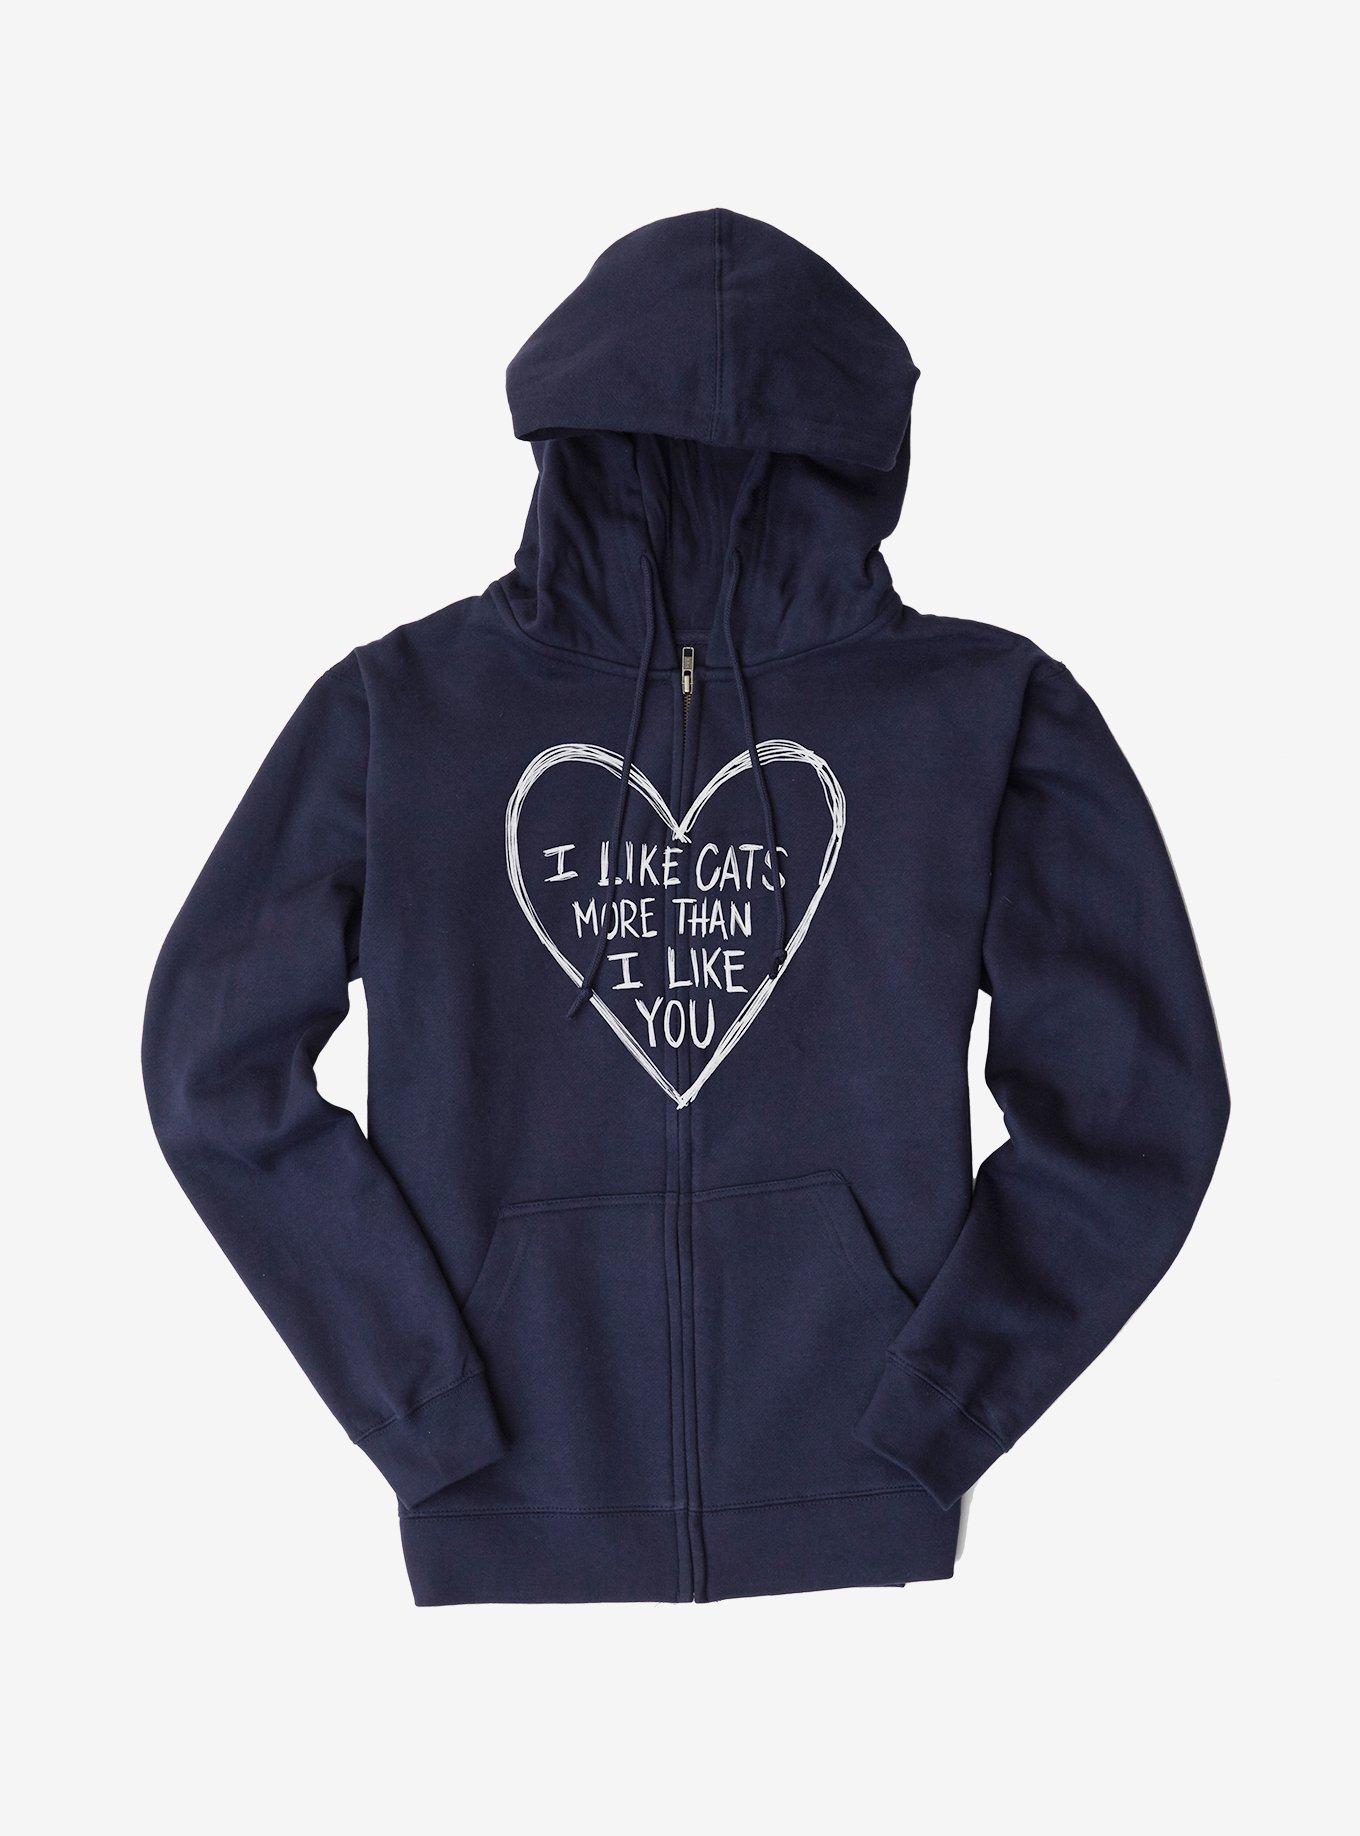 I Like Cats Hoodie, NAVY, hi-res